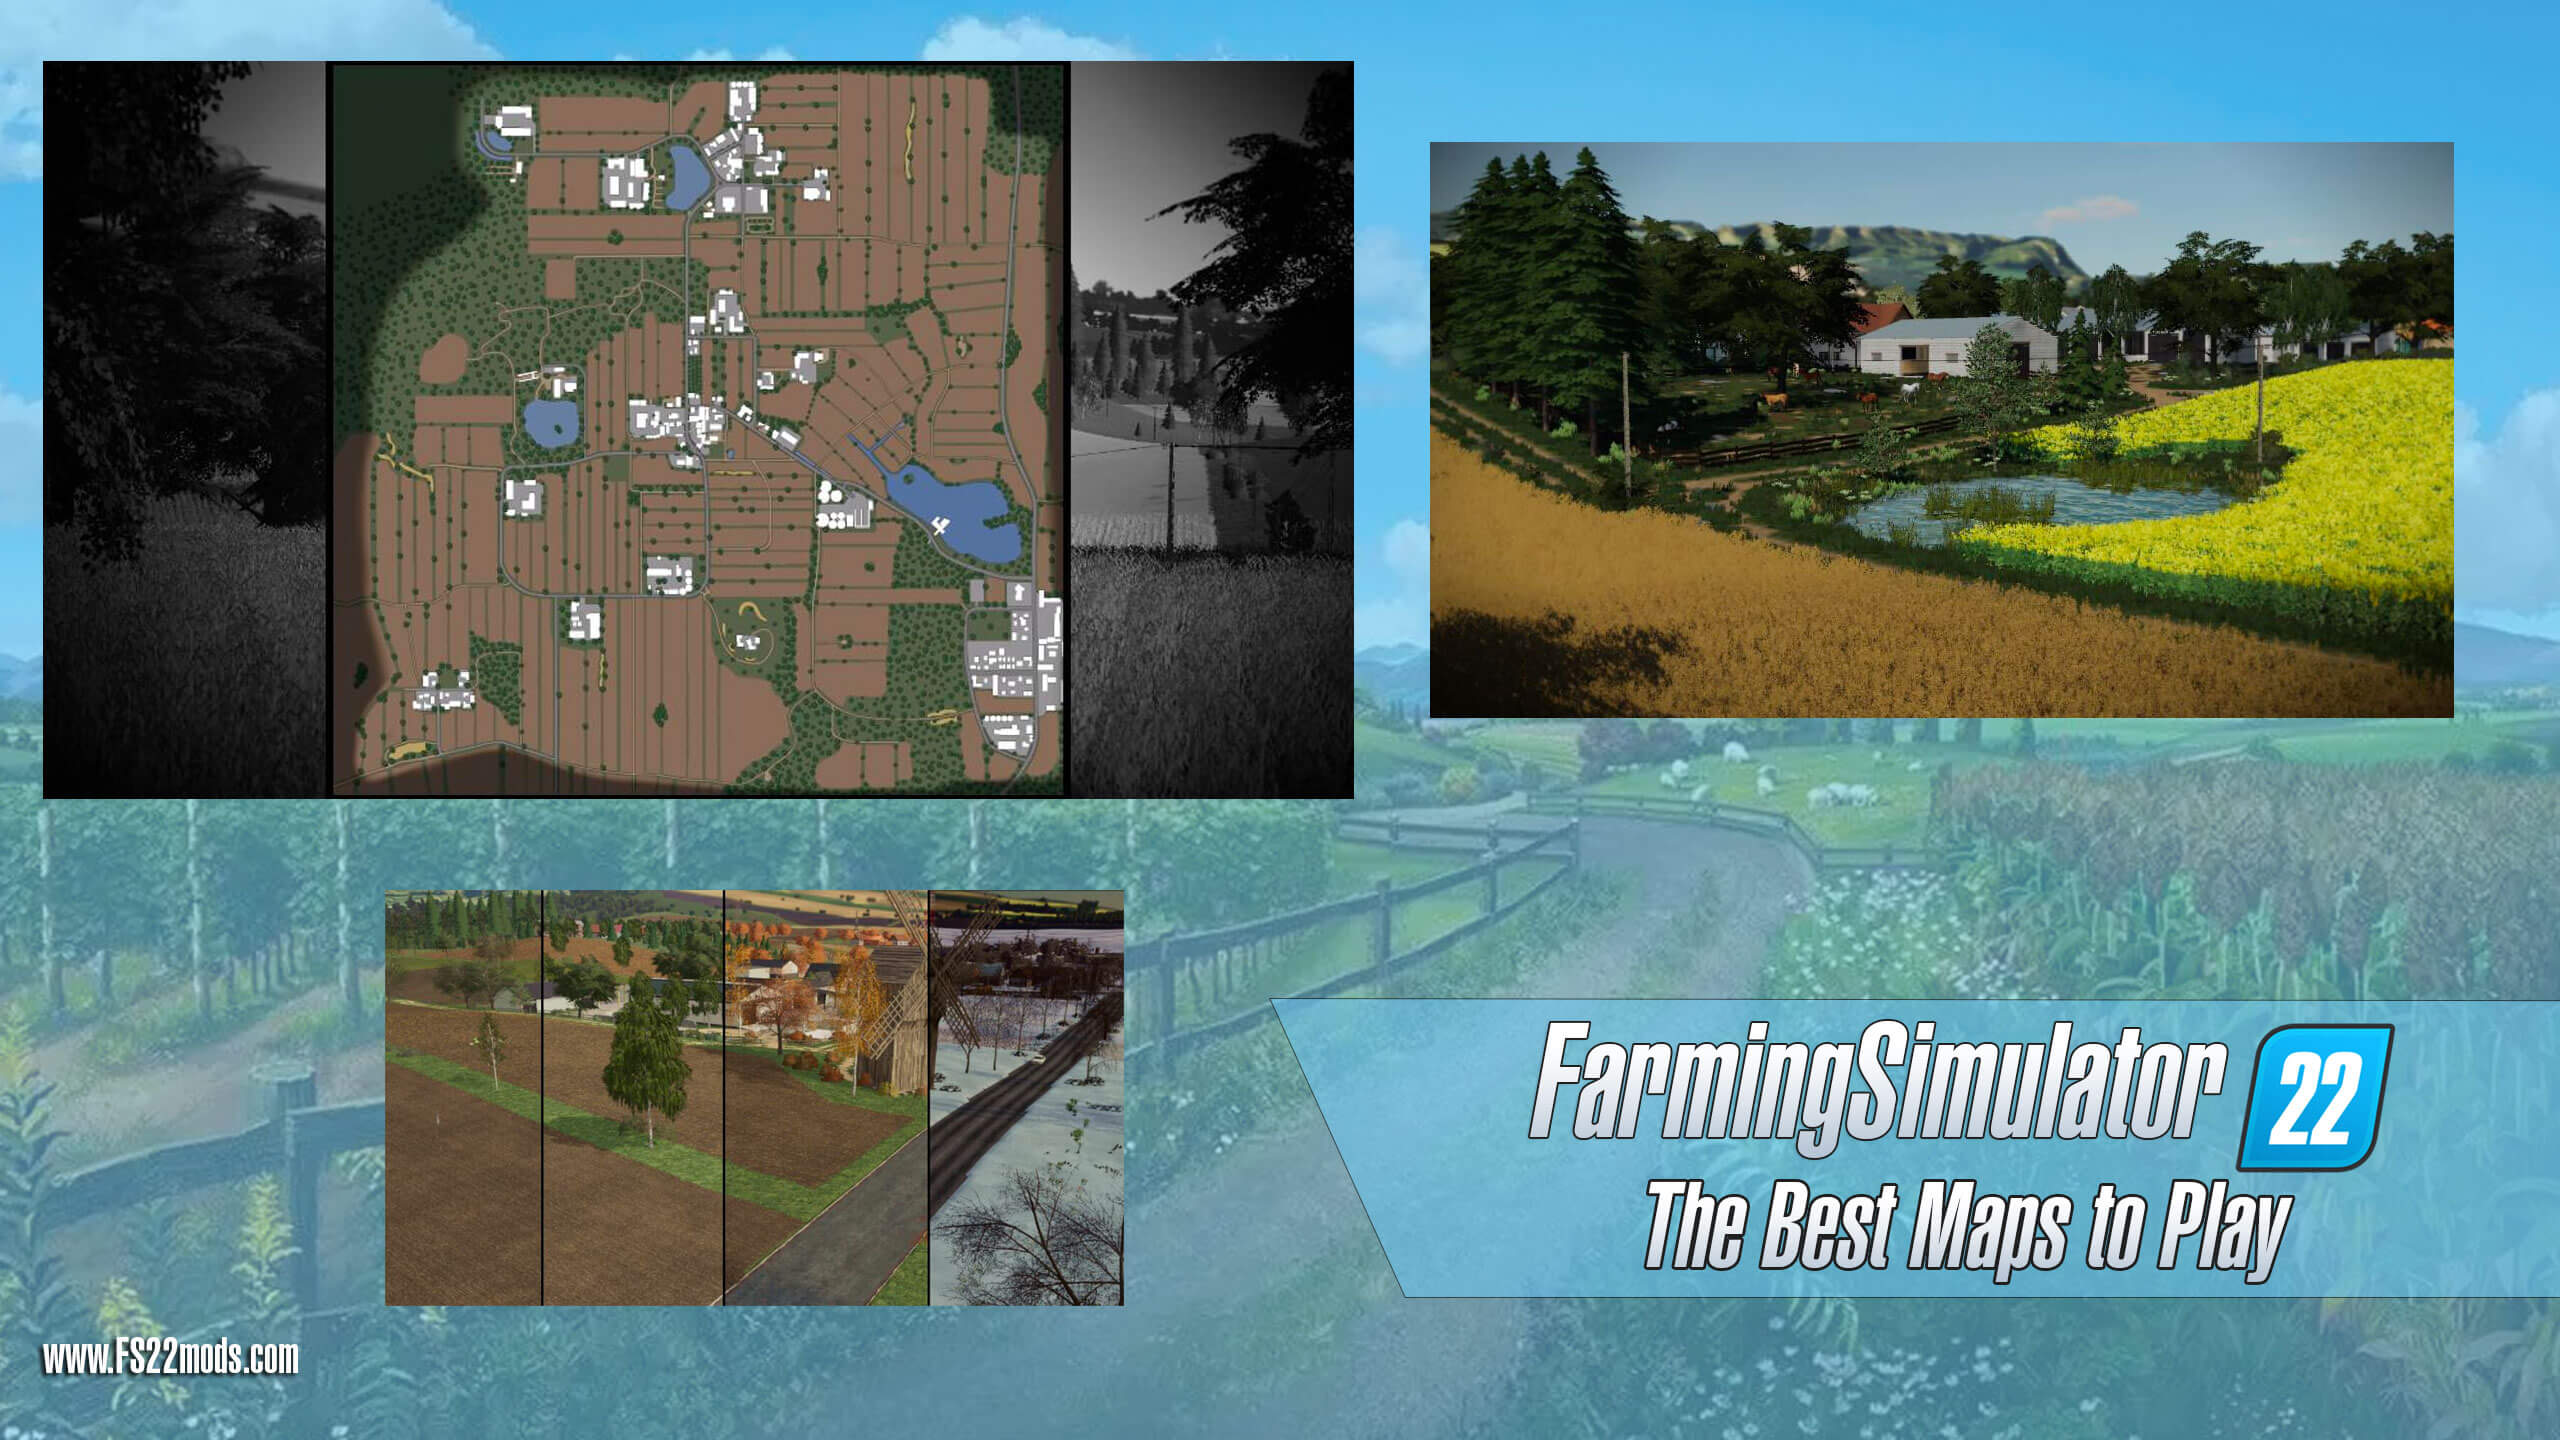 Best Maps To Play On Farming Simulator 22 Fs22 Free Hot Nude Porn Pic Gallery 0366